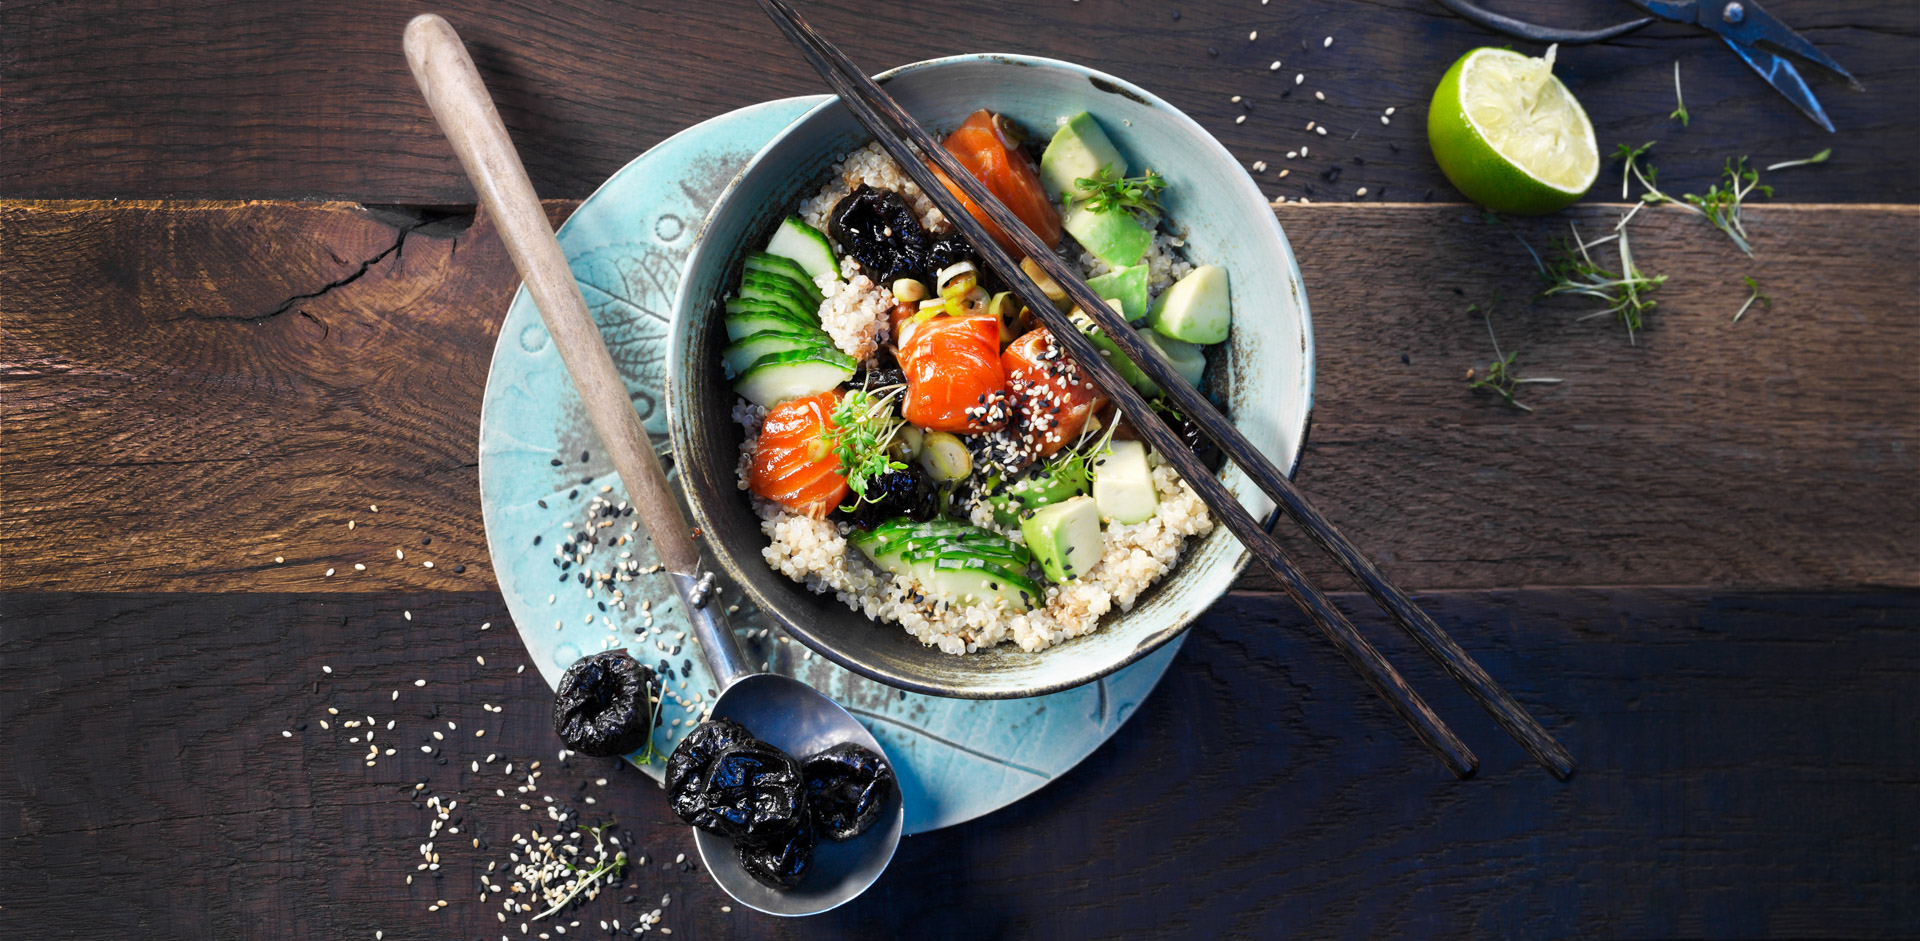 When mixed with soy sauce, prunes lend complimentary sweetness in place of sugar. In this poke bowl, the flavors of soy sauce and sesame come to life with bits of sweet prunes and peppery greens